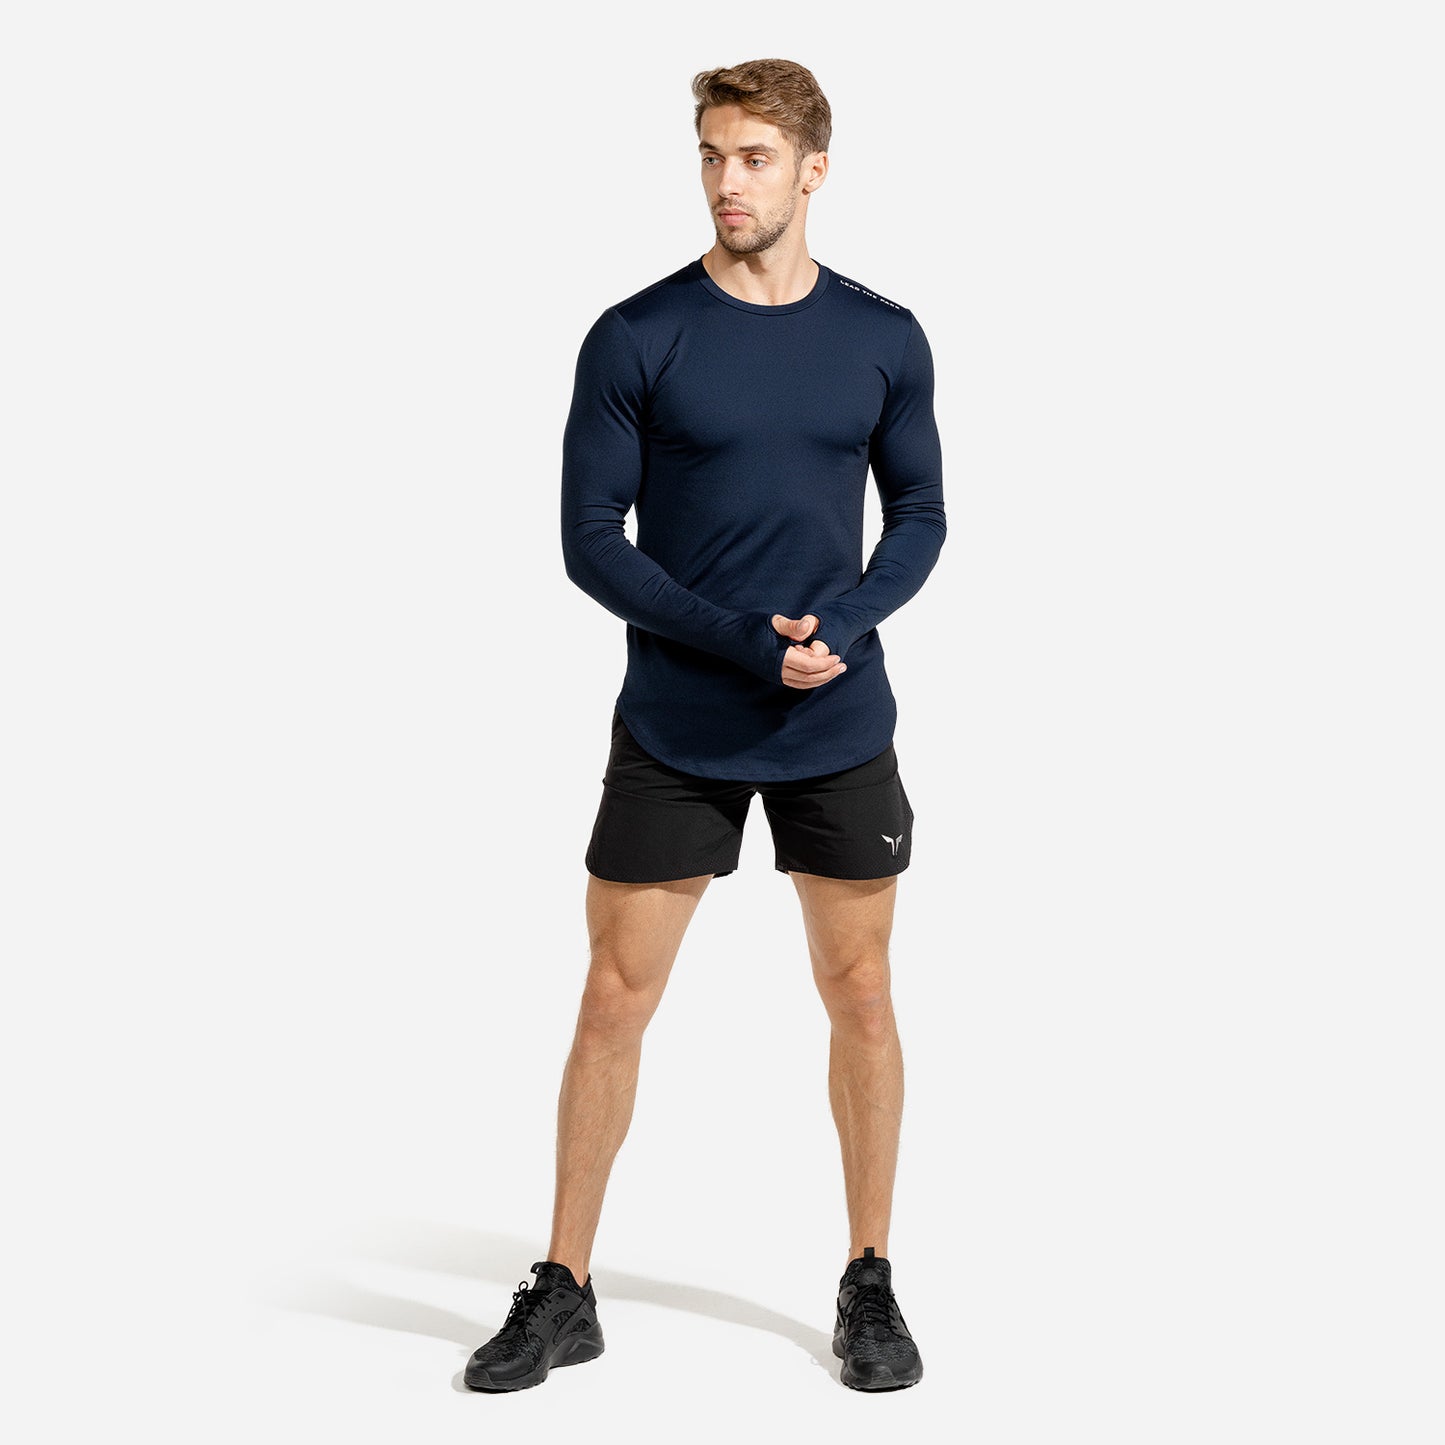 squatwolf-gym-wear-statement-muscle-tee-navy-workout-shirts-for-men